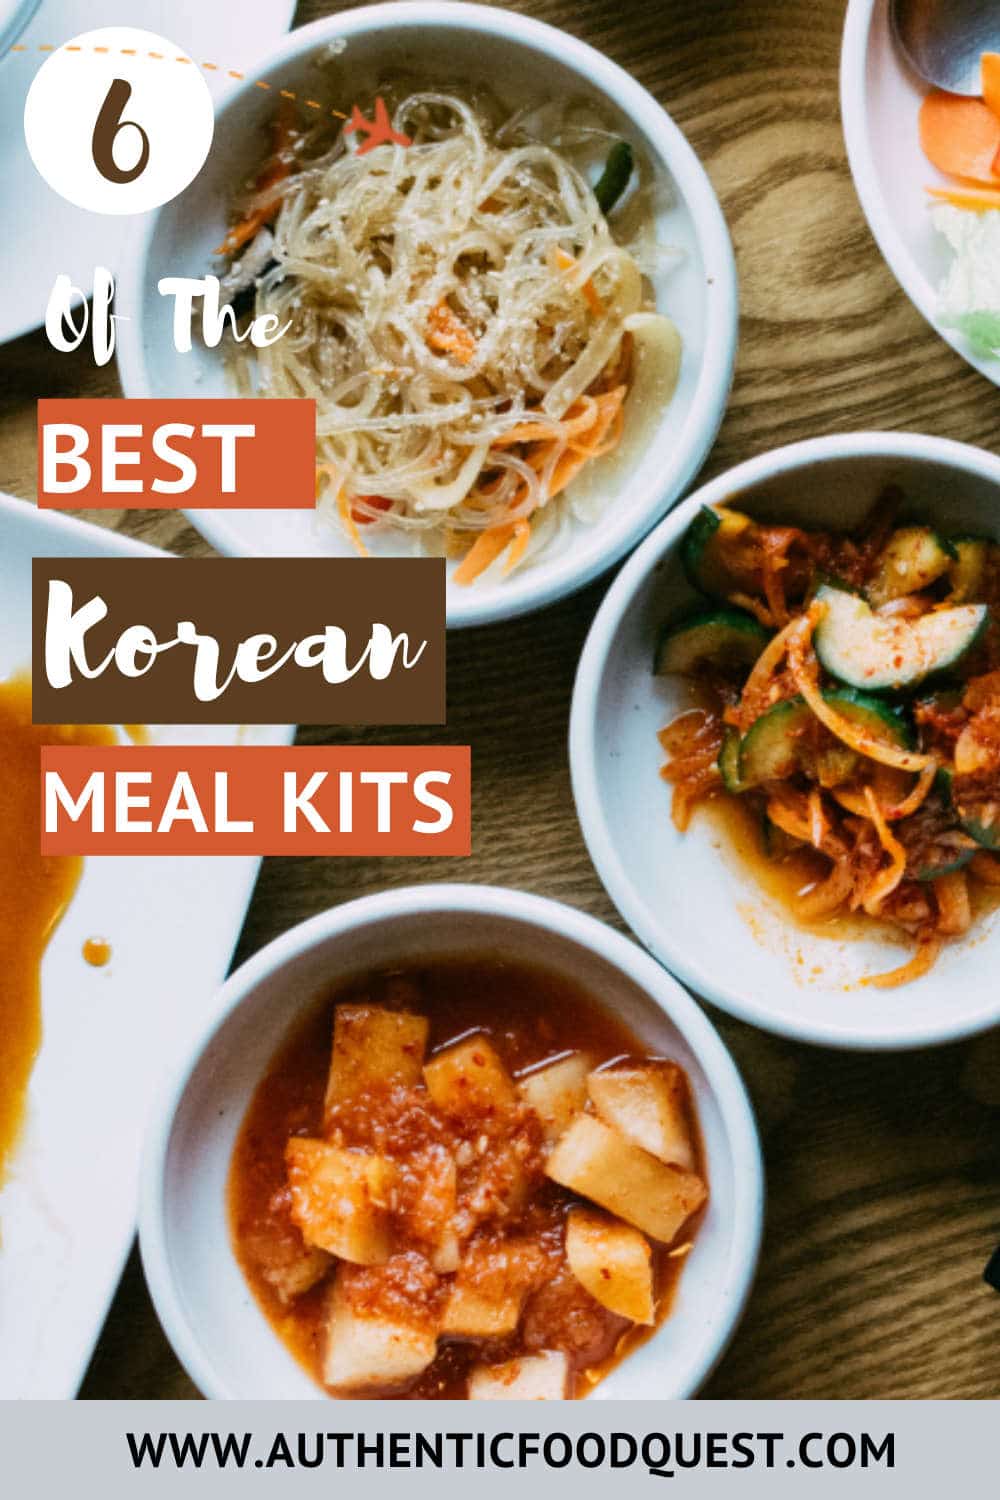 5 Of The Best Korean Meal Kits Options To Spice Up Your Dinner